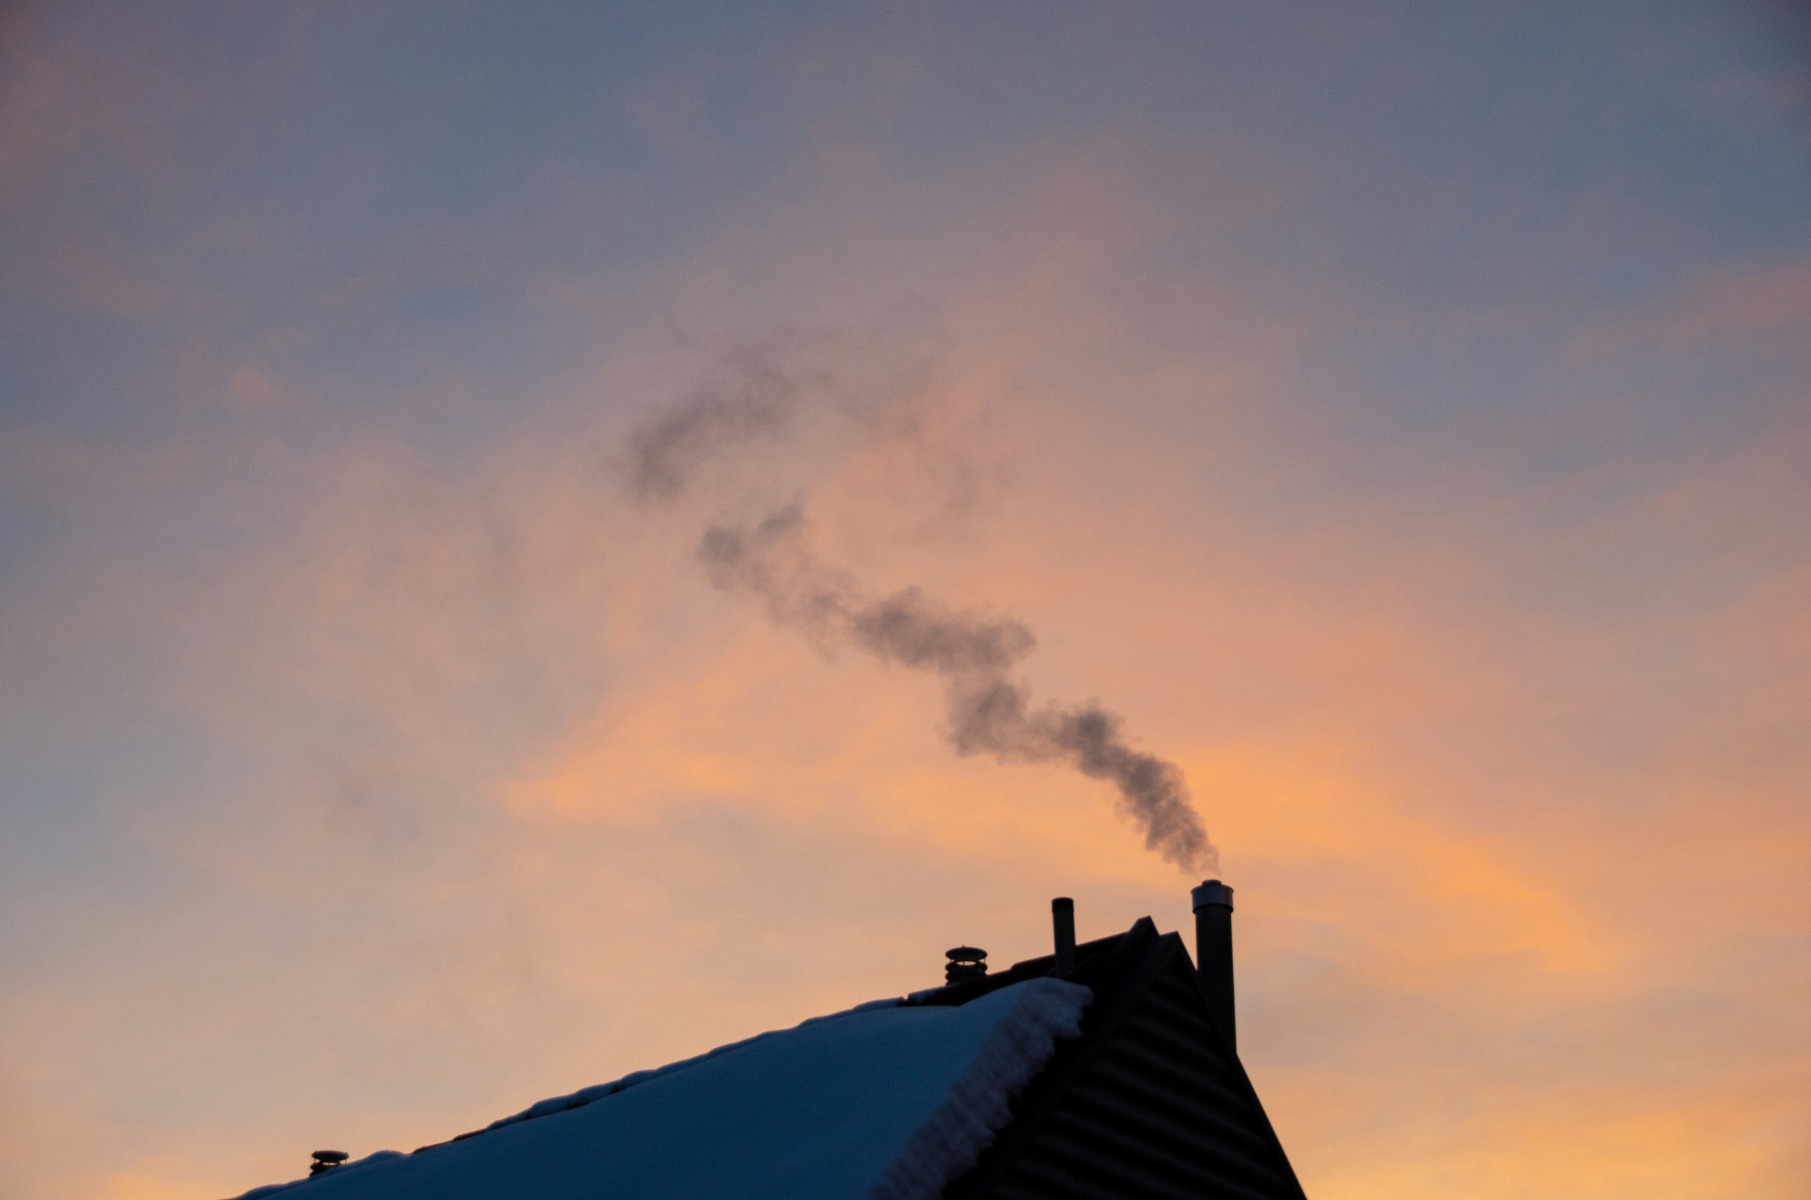 Smoke coming out of the chimney of a house with snowy roof